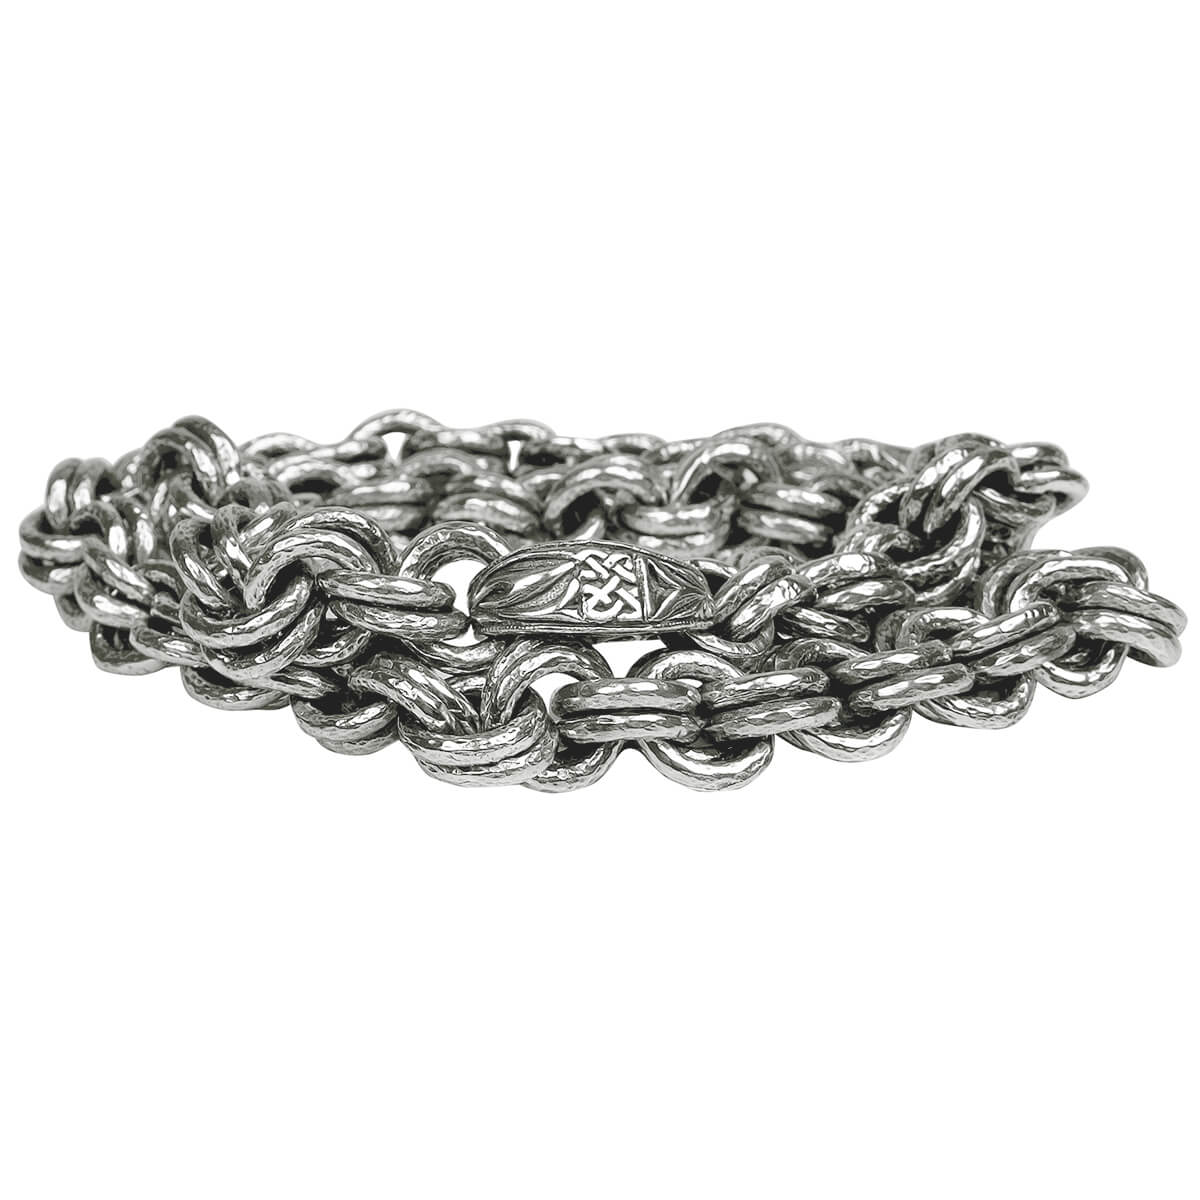 Men's Silver Chains – Big and Bold Designs